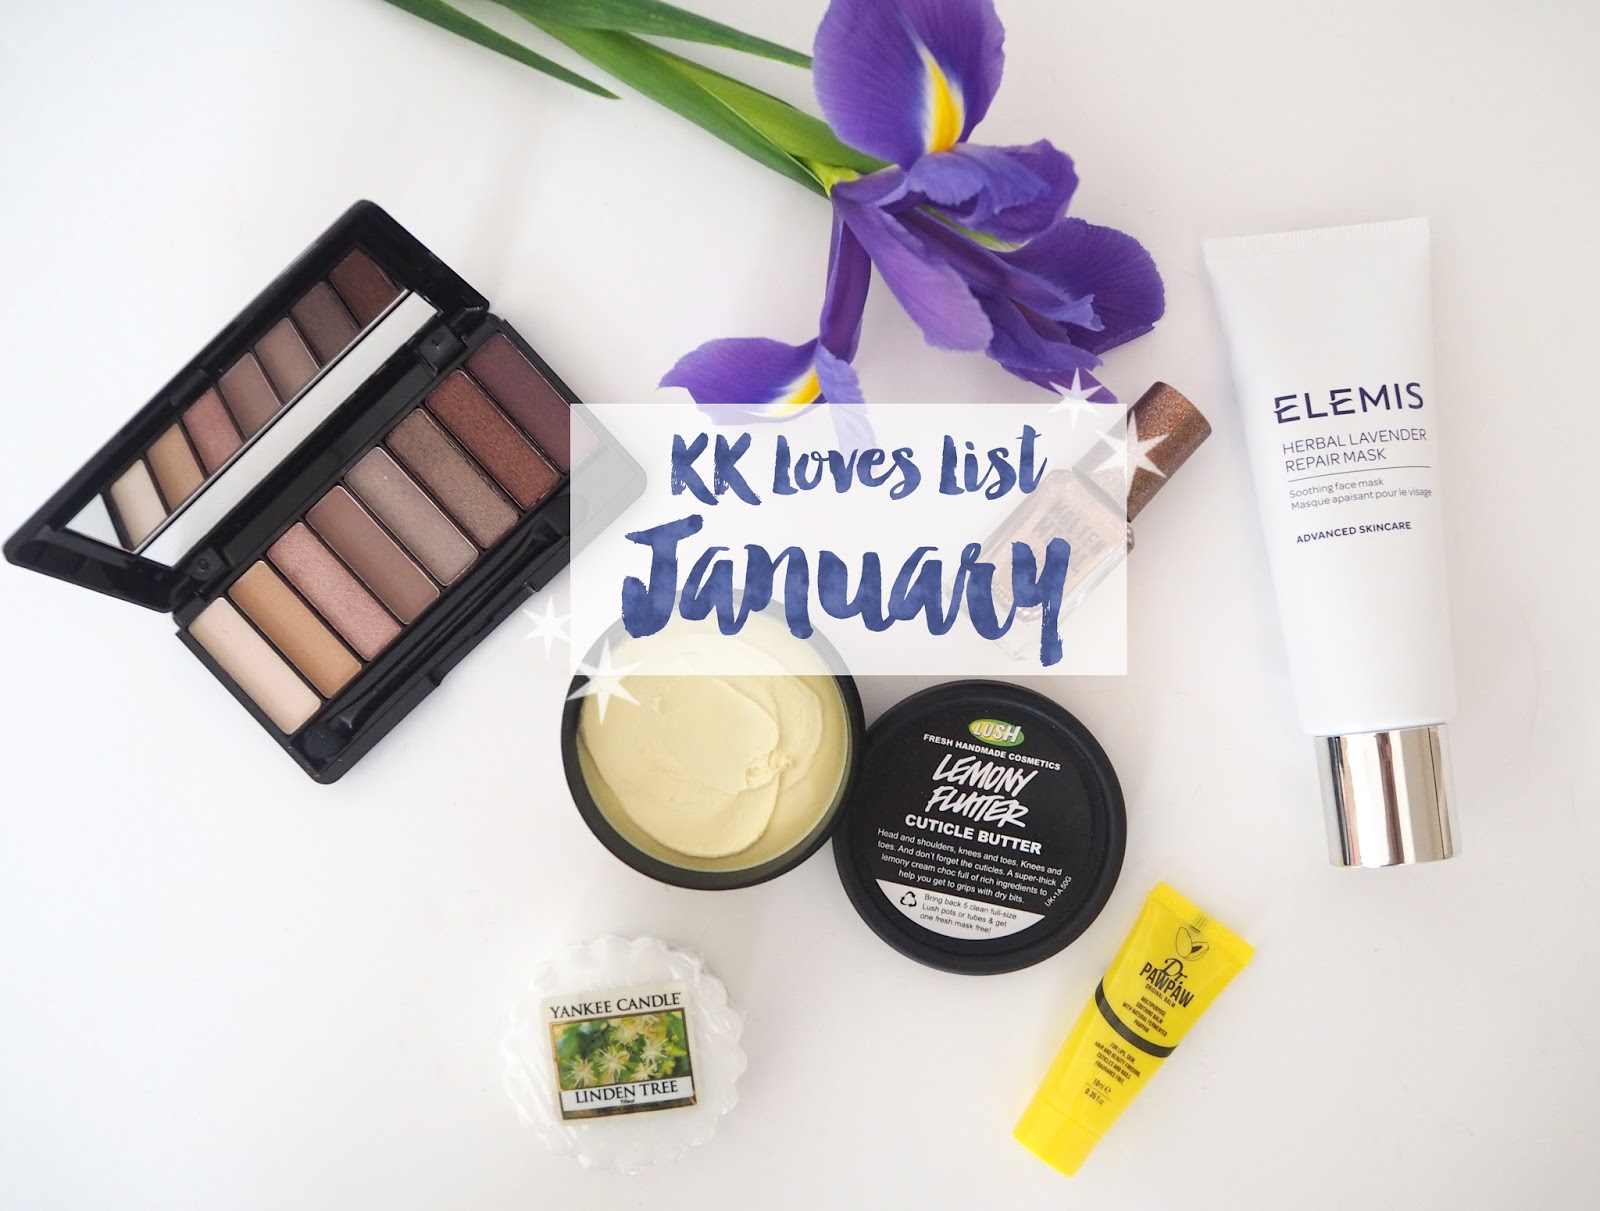 Loves List: January, Katie Kirk Loves, UK Blogger, Lifestyle Blogger, Beauty Blogger, Swatches, Rimmel London, Dr Paw Paw, Yankee Candle, Linden Tree Wax Melt, Lush Cosmetics, Lemony Flutter Cuticle Butter, Barry M Copper Mine Nail Polish, Nail Blogger, Elemis Herbal Lavender Repair Mask, 